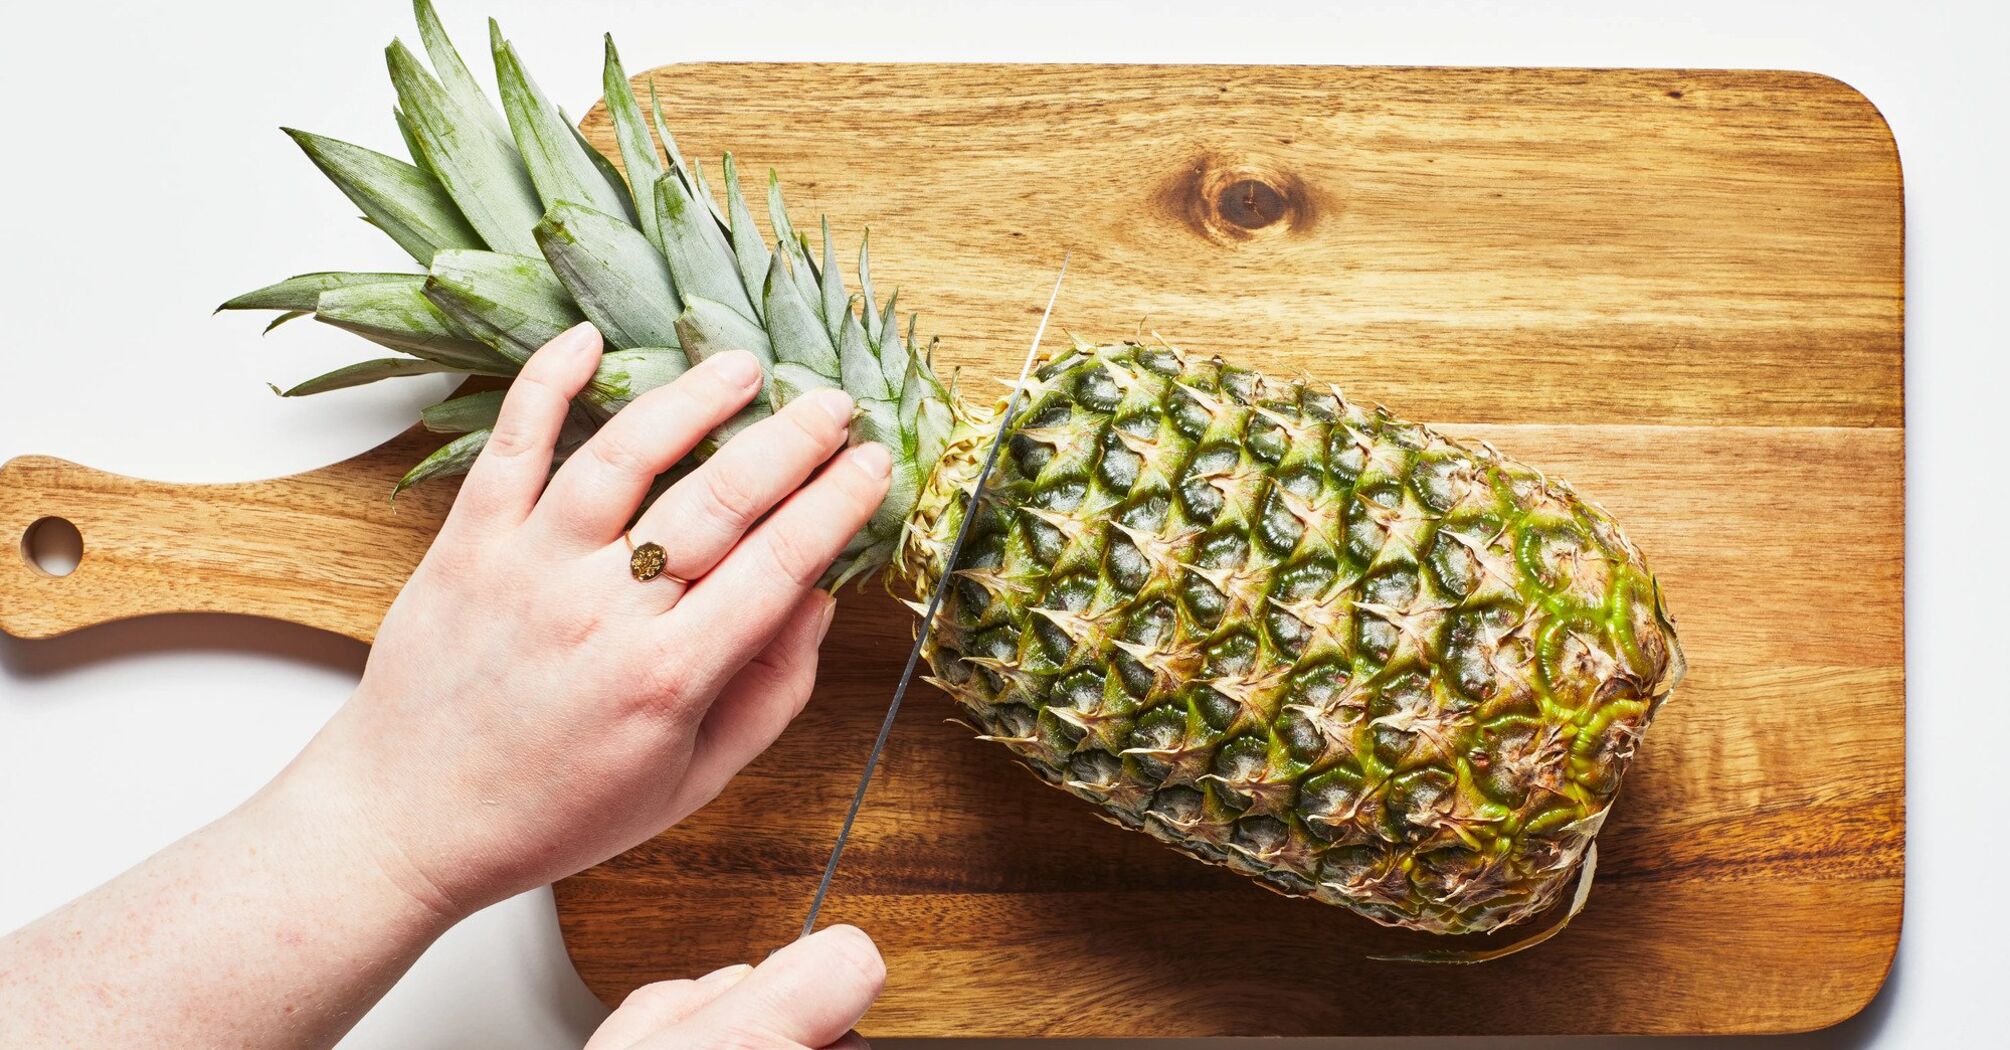 How to peel a pineapple quickly and easily